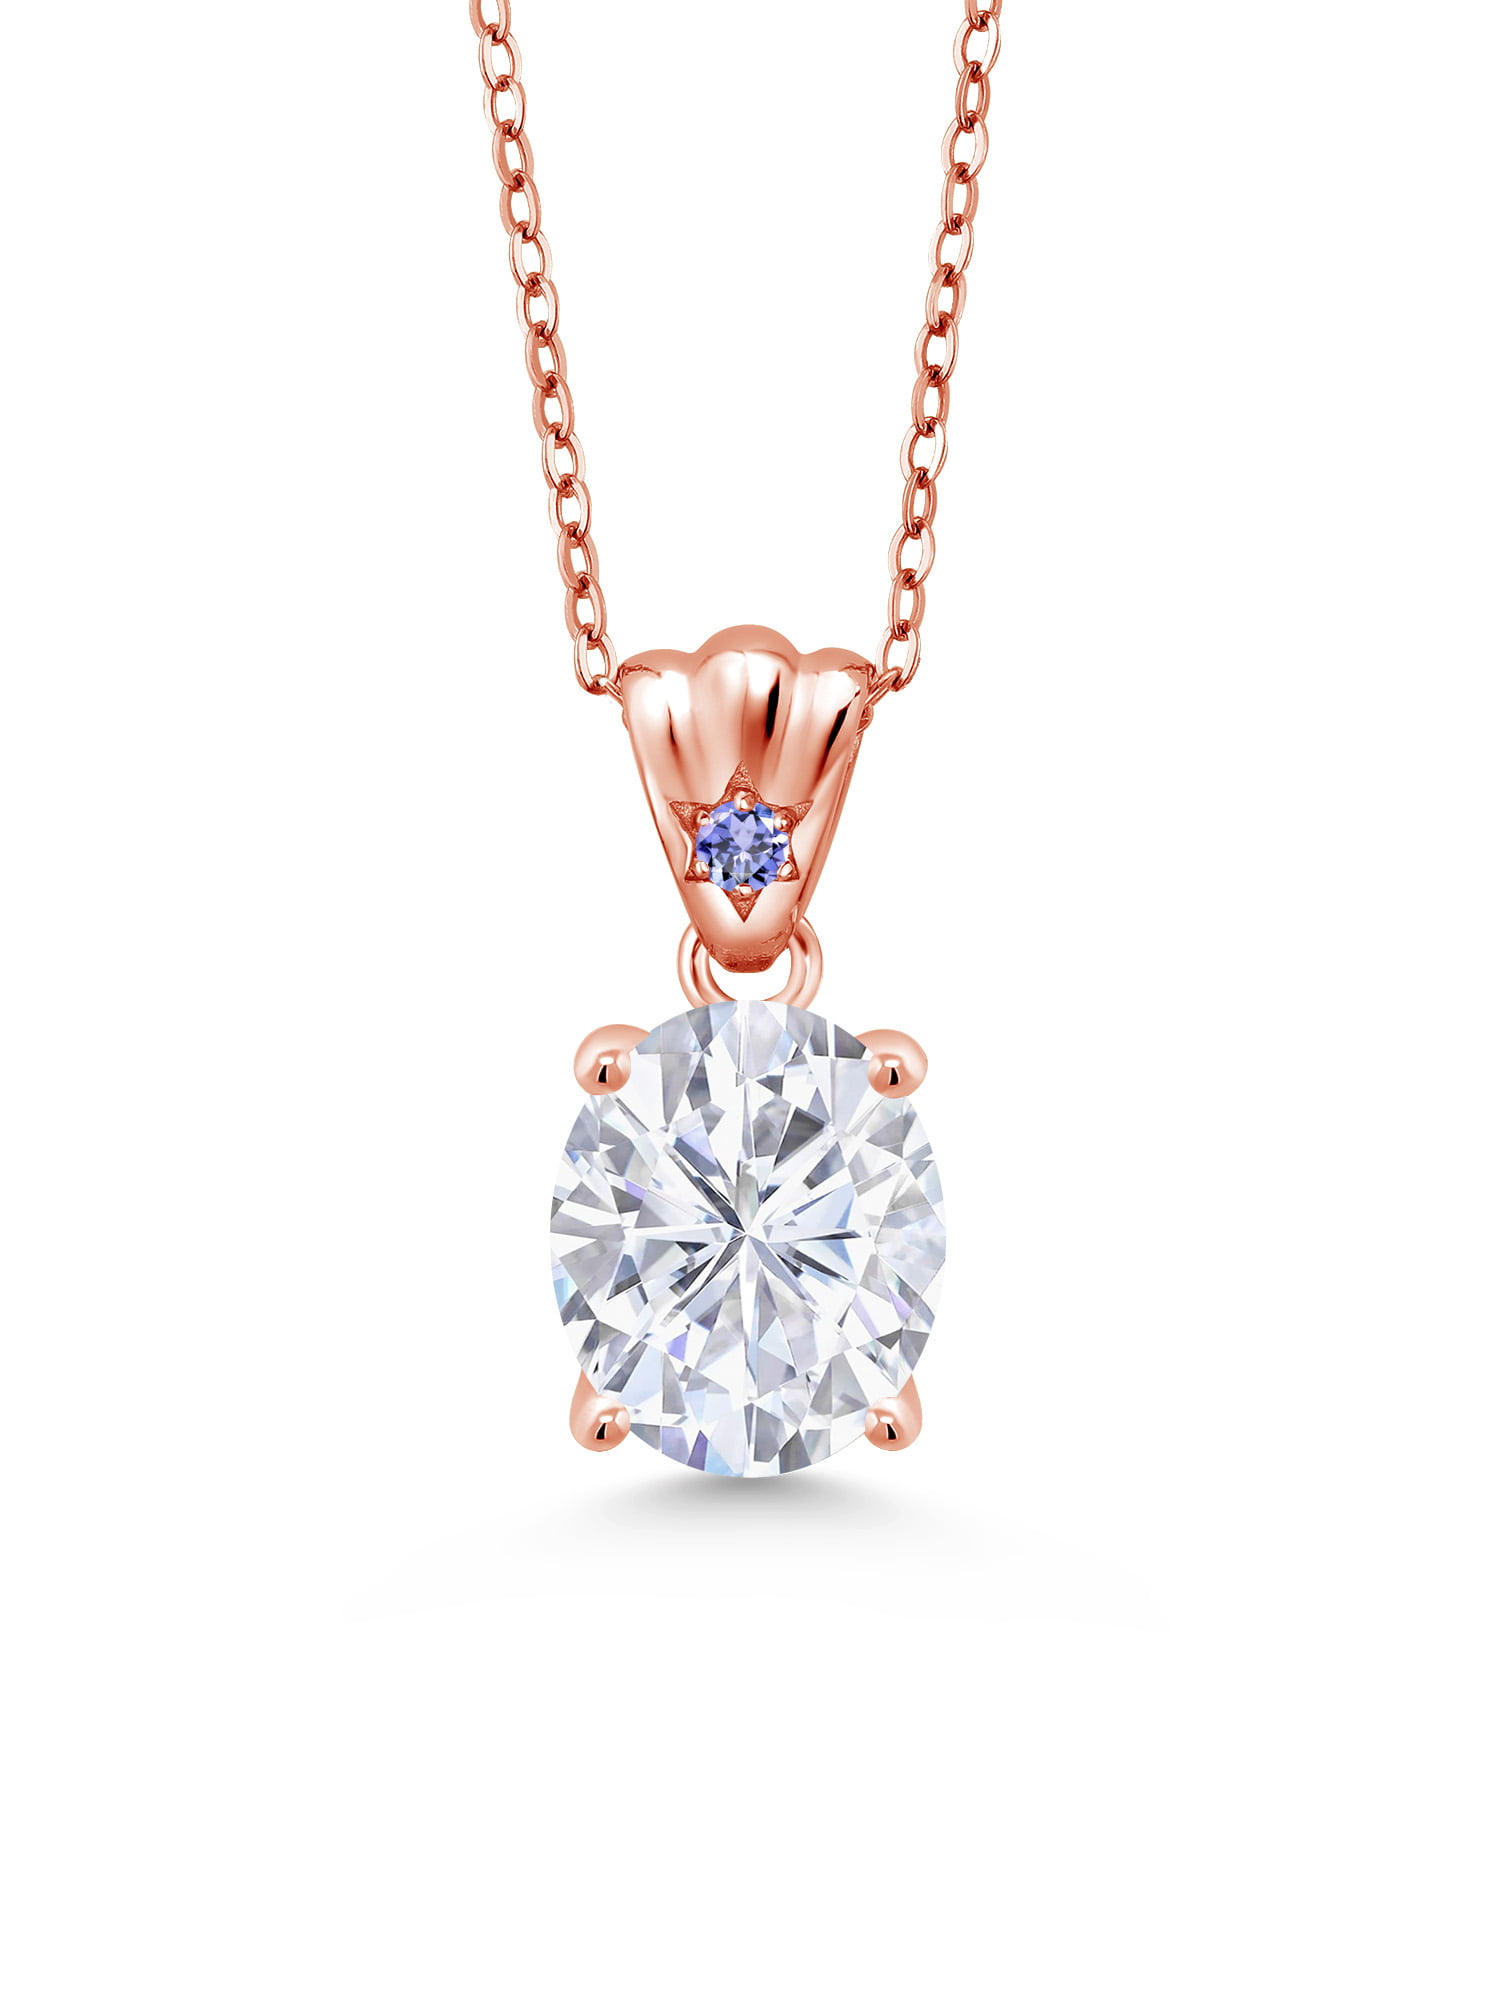 Gem Stone King 18K Rose Gold Plated Silver Pendant Set with Forever Classic  Very Light Oval 4.34cttw Created Moissanite from Charles & Colvard and 